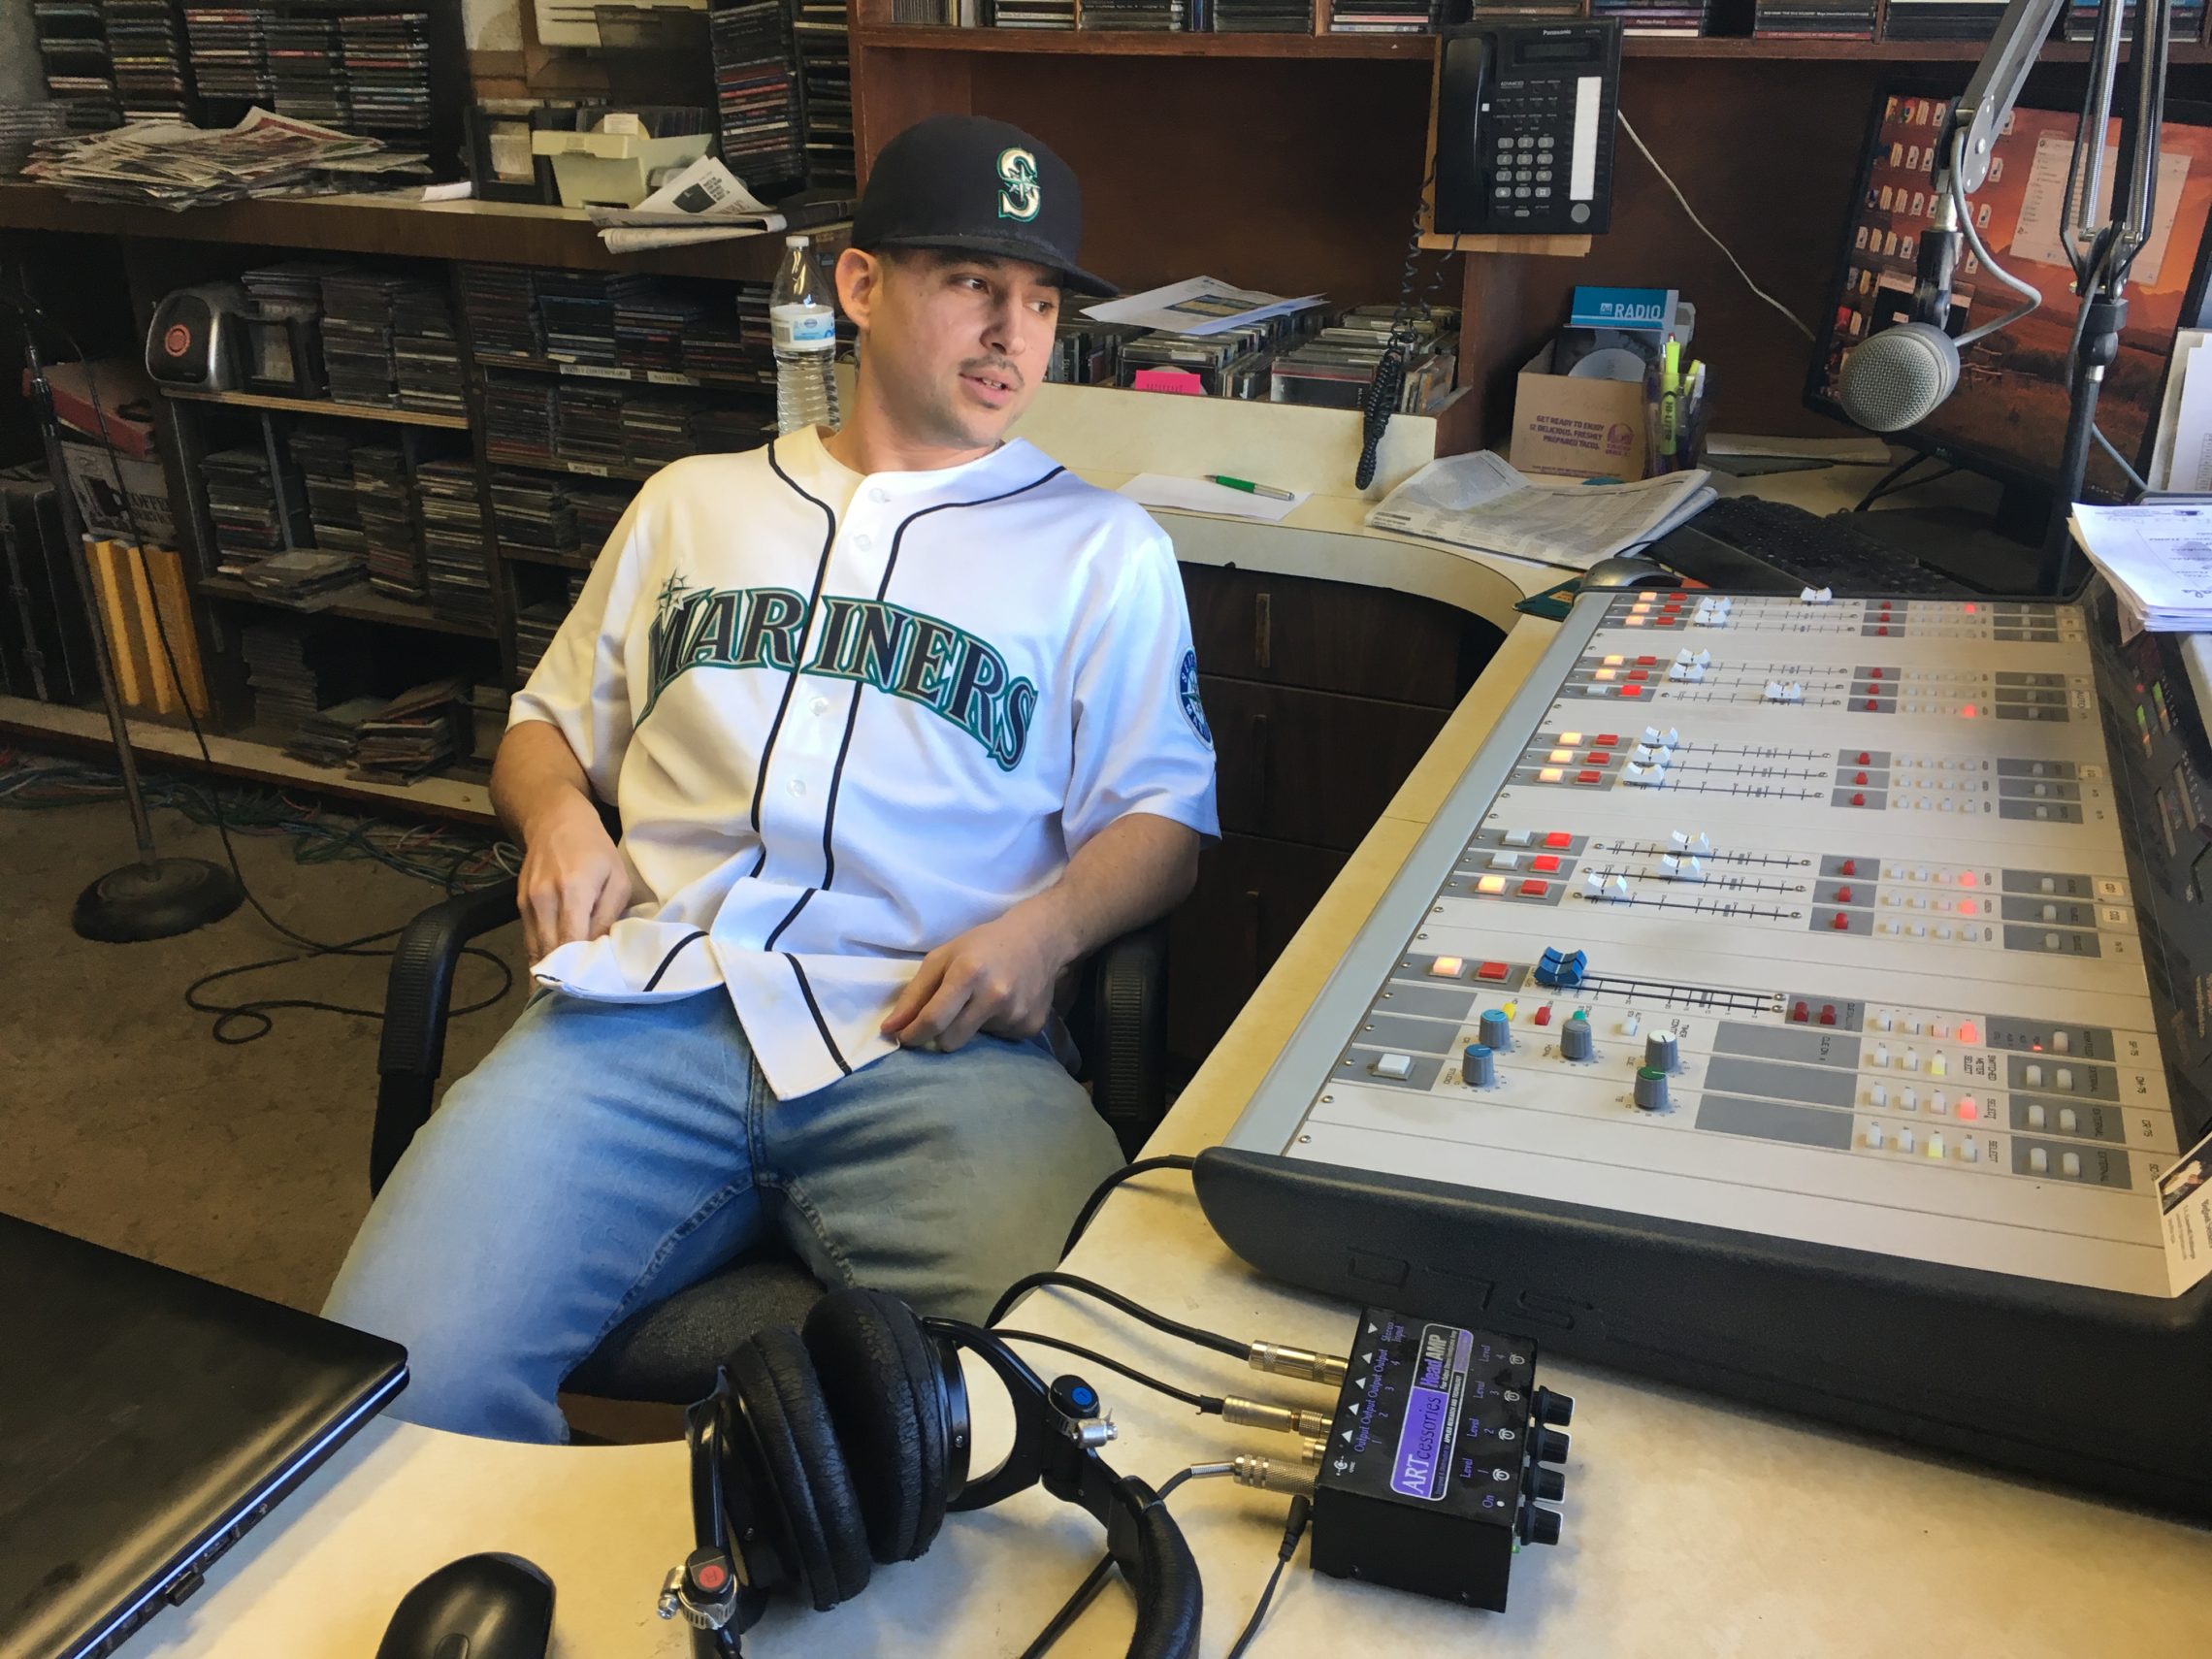 KYNR host Ryan Craig at the station in February 2018, in front of the audio board that was stolen in October. CREDIT: Esmy Jimenez/NWPB